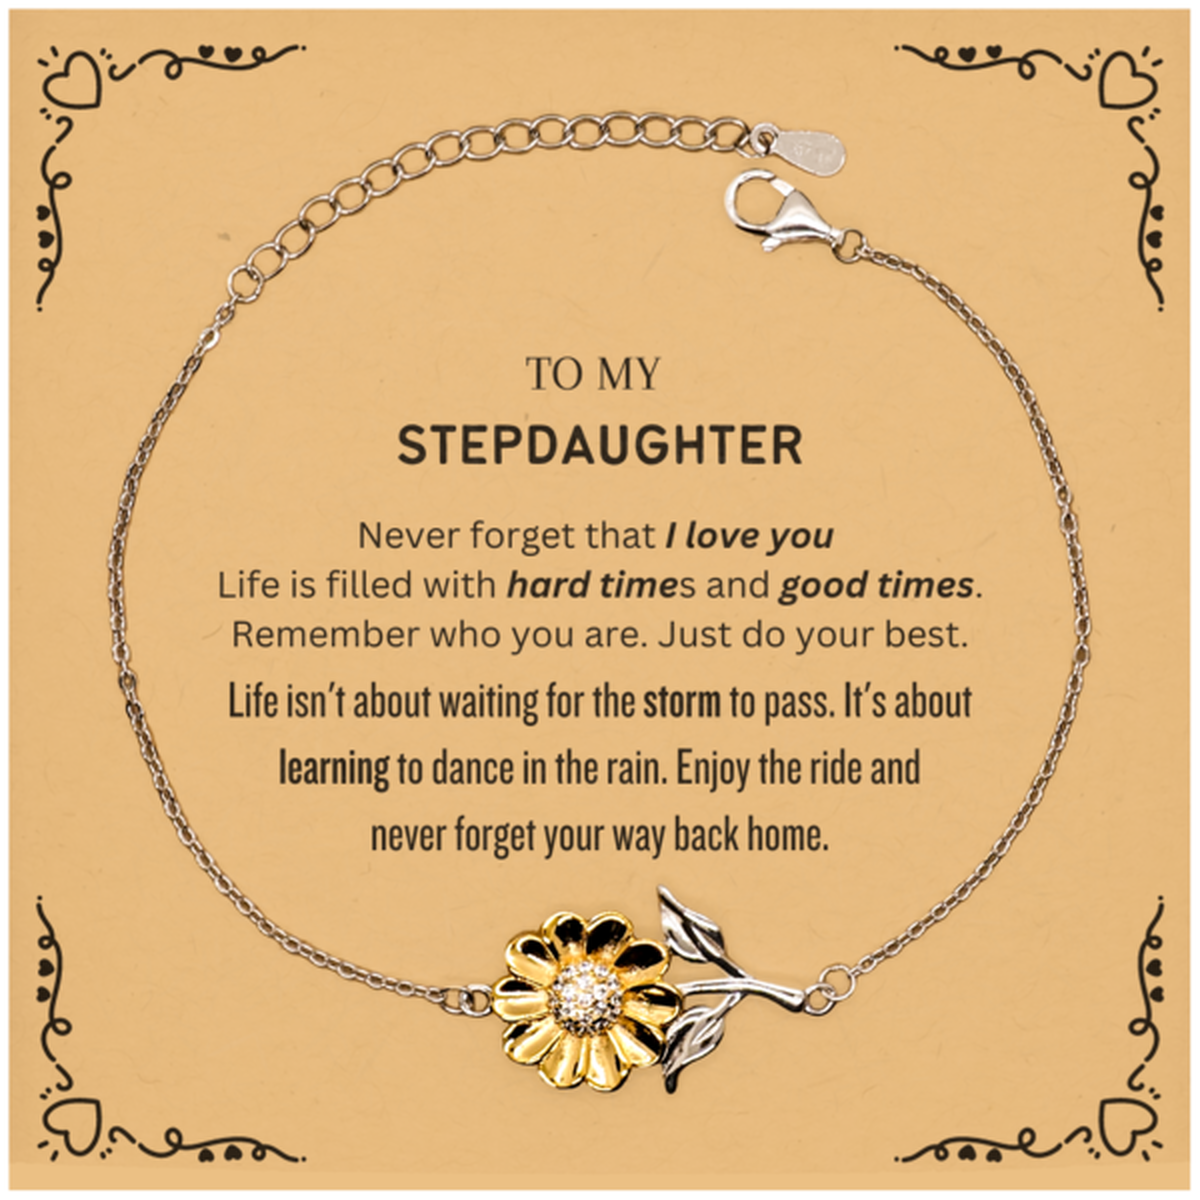 Christmas Stepdaughter Sunflower Bracelet Gifts, To My Stepdaughter Birthday Thank You Gifts For Stepdaughter, Graduation Unique Gifts For Stepdaughter To My Stepdaughter Never forget that I love you life is filled with hard times and good times. Remember